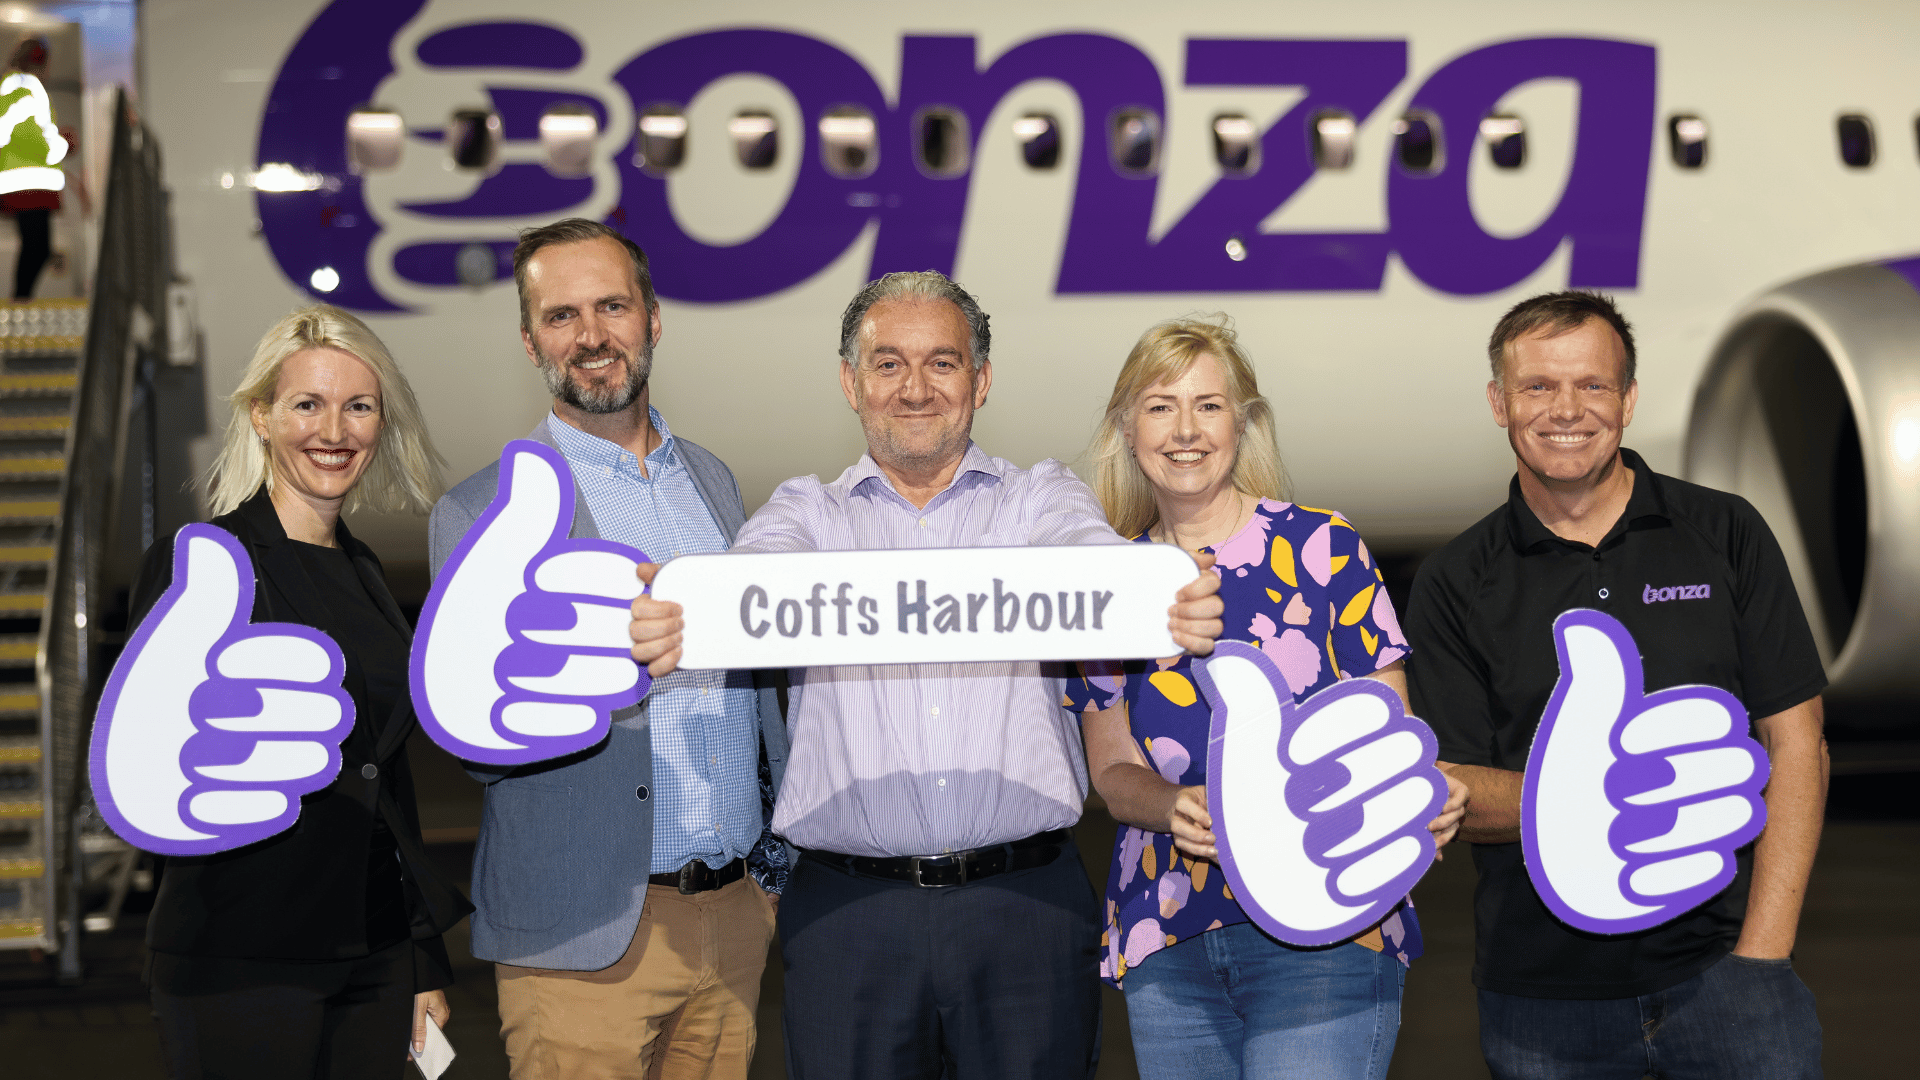 Coffs Harbour Airport GM Frank Mondello, Bonza CEO Tim Jordan, Sunshine Coast Airport GM Infrastructure and Planning Steve Grant, Sunshine Coast Airport GM Corporate Comms Kylie Ezzy and Coffs Coast GM Natalia Cowley holding Bonza thumbs and smiling at camera.